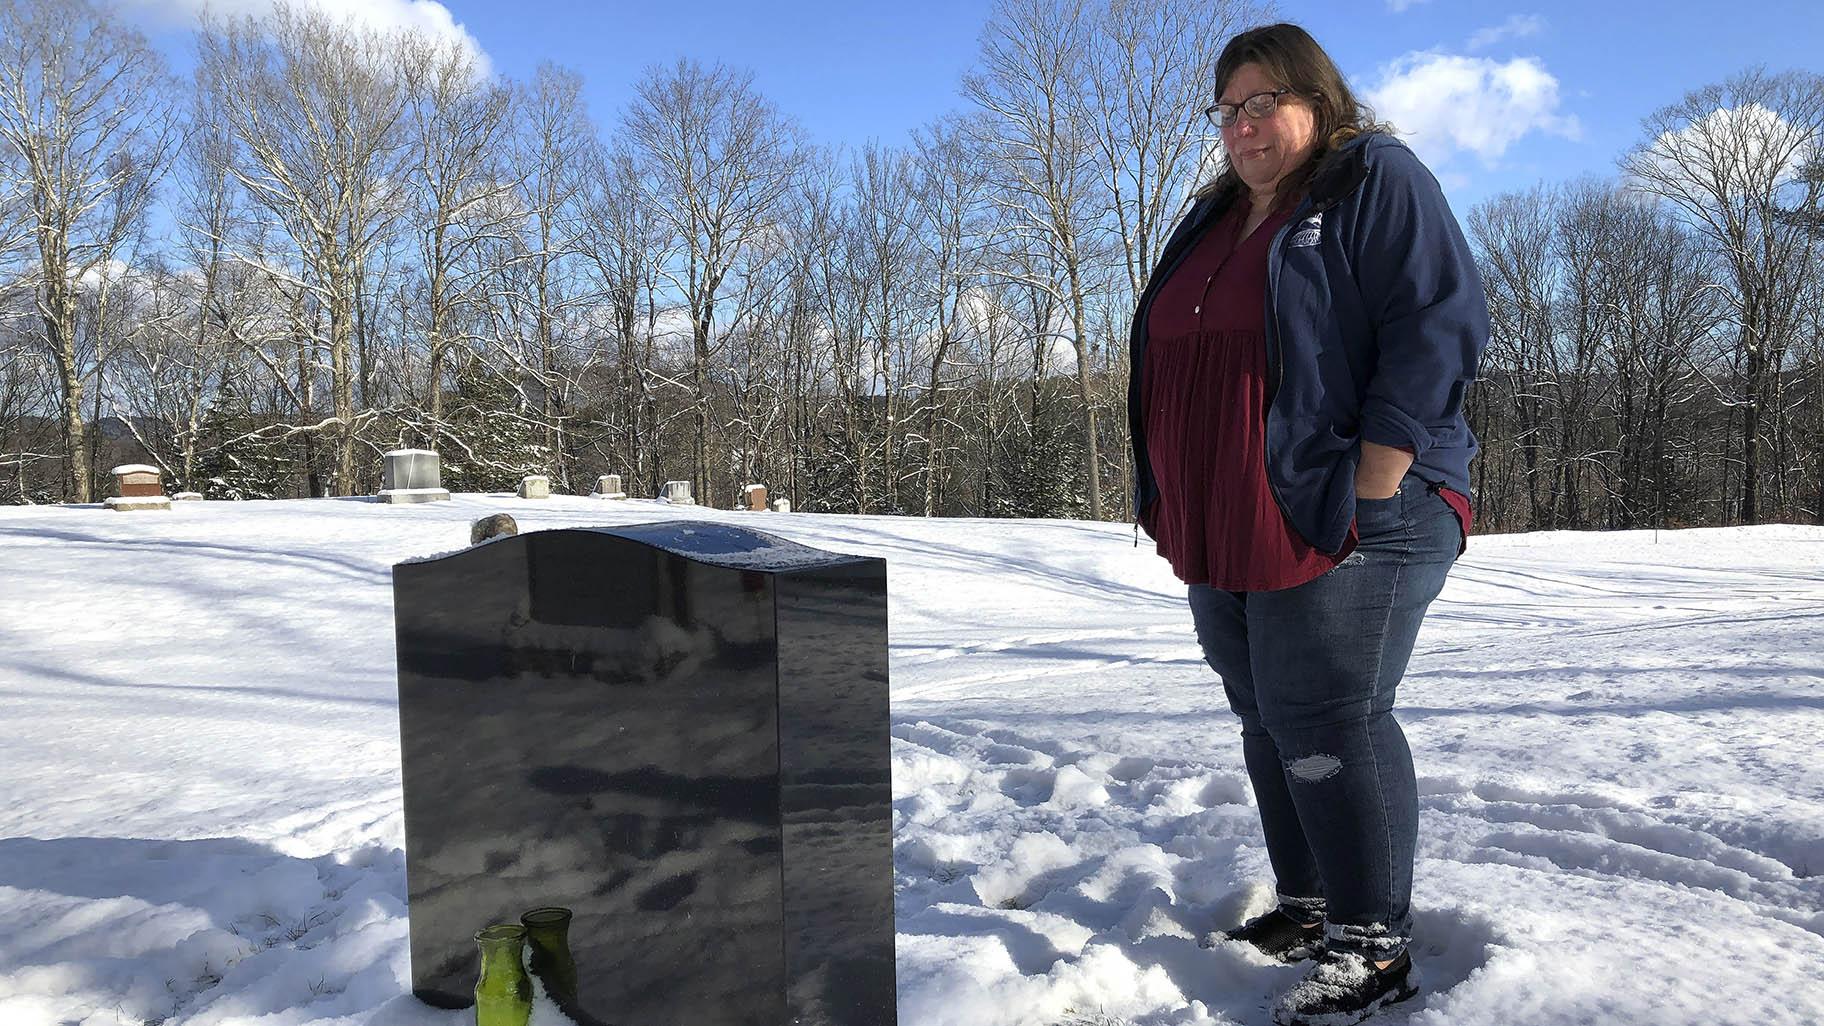 Deb Walker visits the grave of her daughter, Brooke Goodwin, Thursday, Dec. 9, 2021, in Chester, Vt. Goodwin, 23, died in March of 2021 of a fatal overdose of the powerful opioid fentanyl and xylazine, an animal tranquilizer that is making its way into the illicit drug supply. (AP Photo / Lisa Rathke, File)